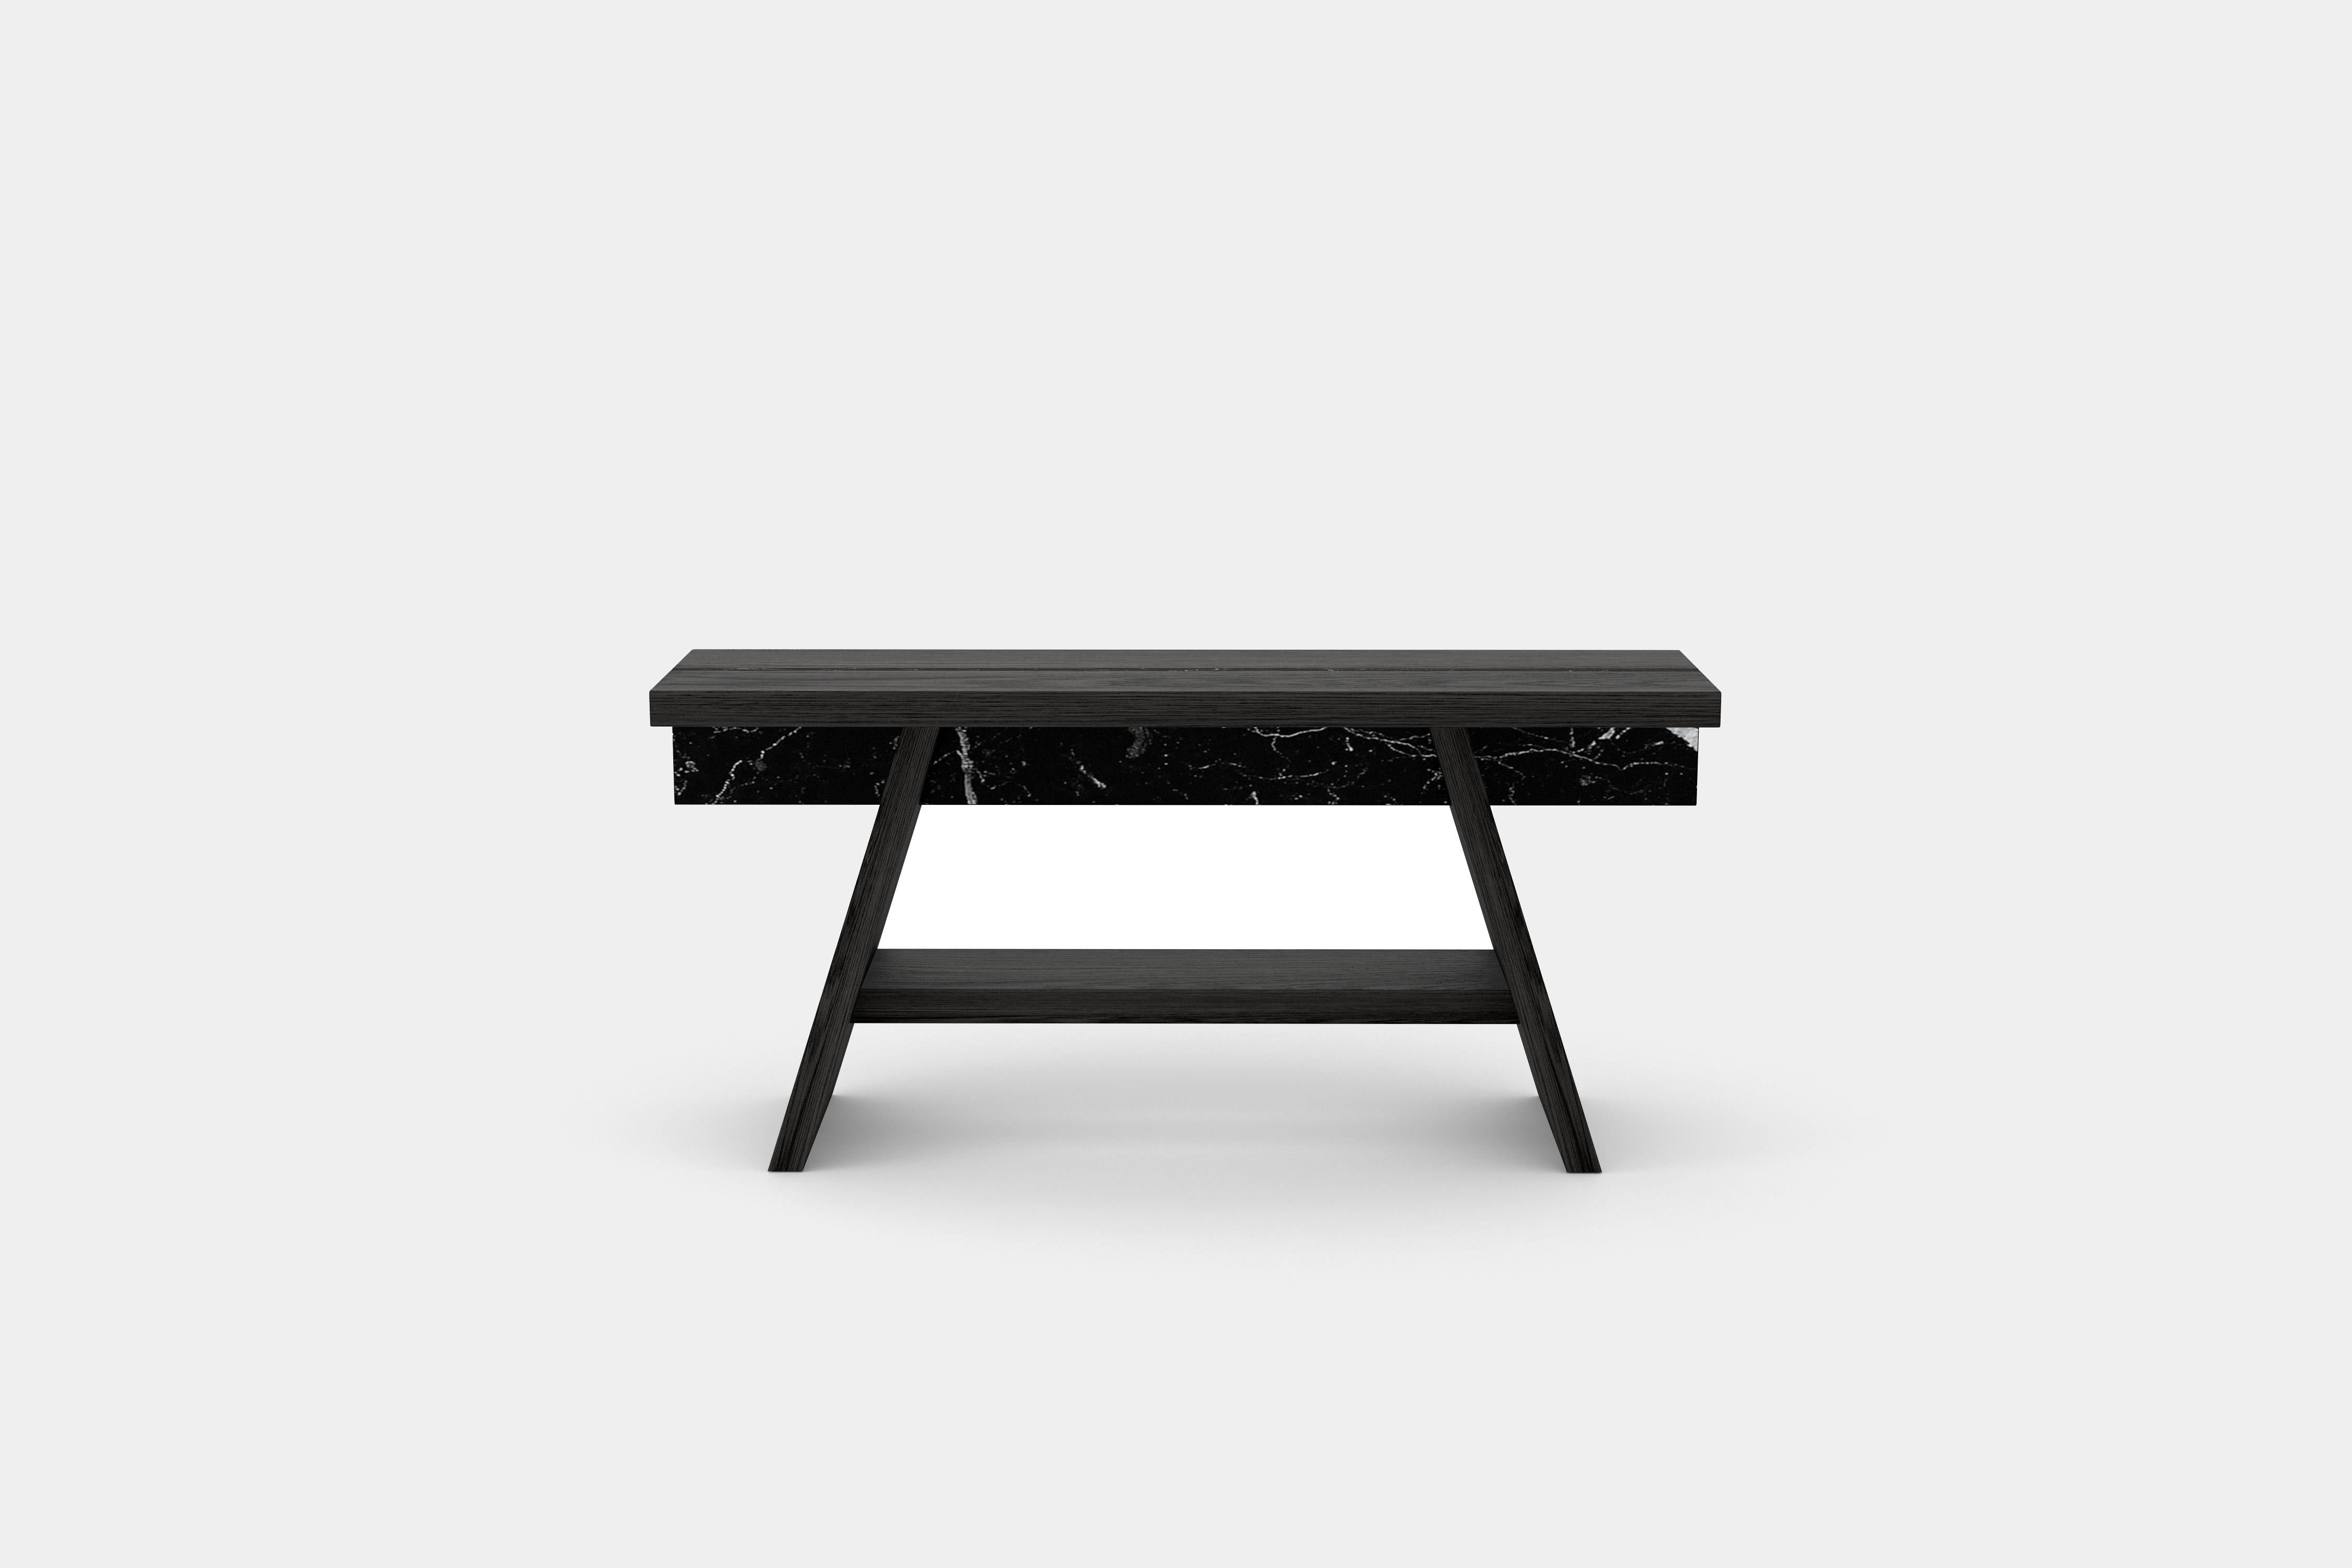 Mexican Laws of Motion Sofa Back in Solid Black Wood, Console Table by Joel Escalona For Sale